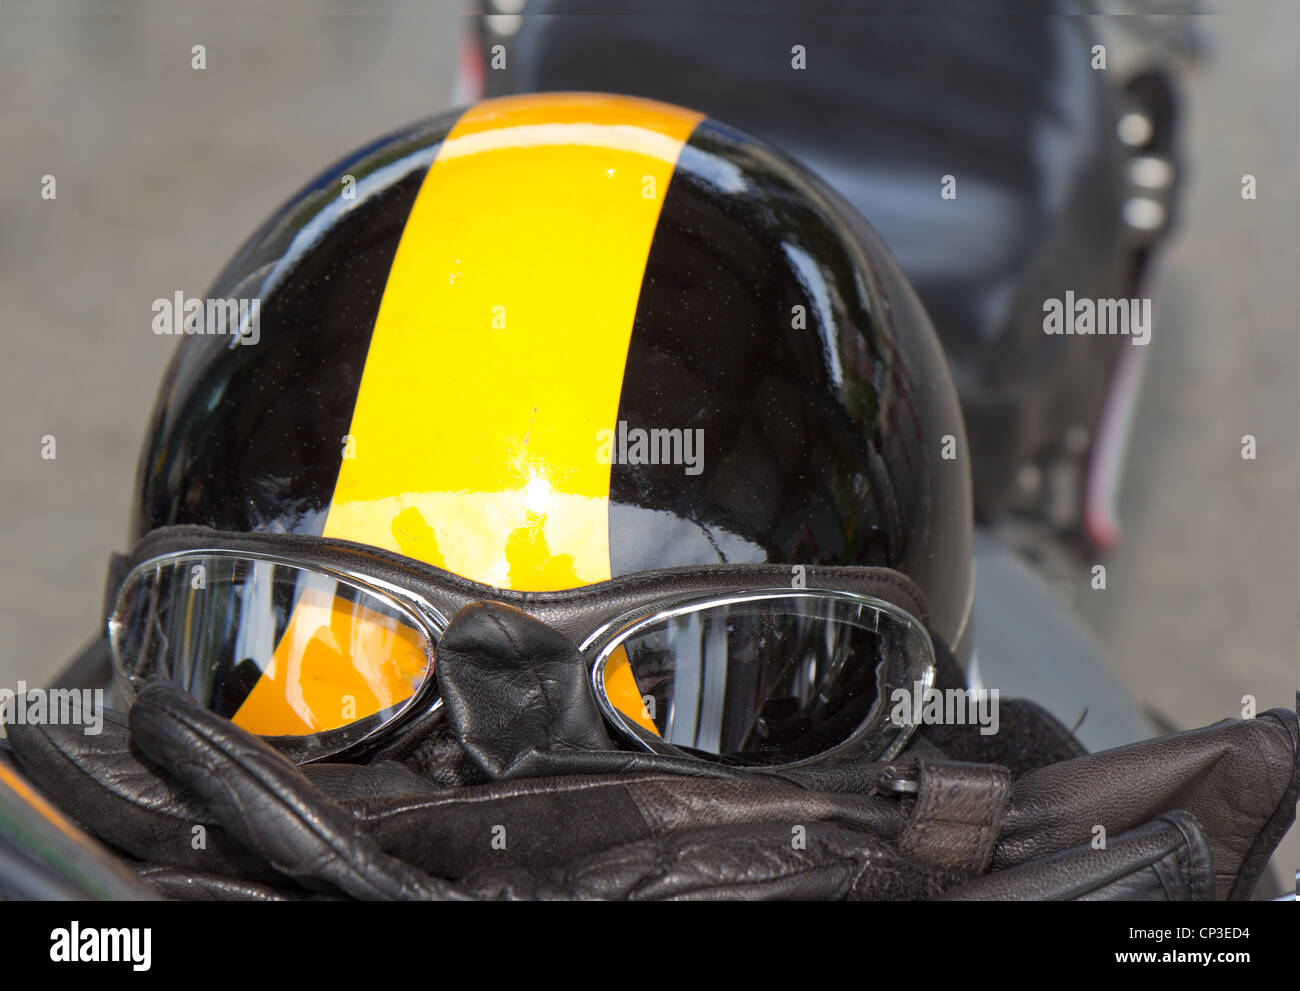 vintage safety gear for motorbikes and convertible cars consisting of leather gloves, helmet and pilot goggles on bike seat Stock Photo